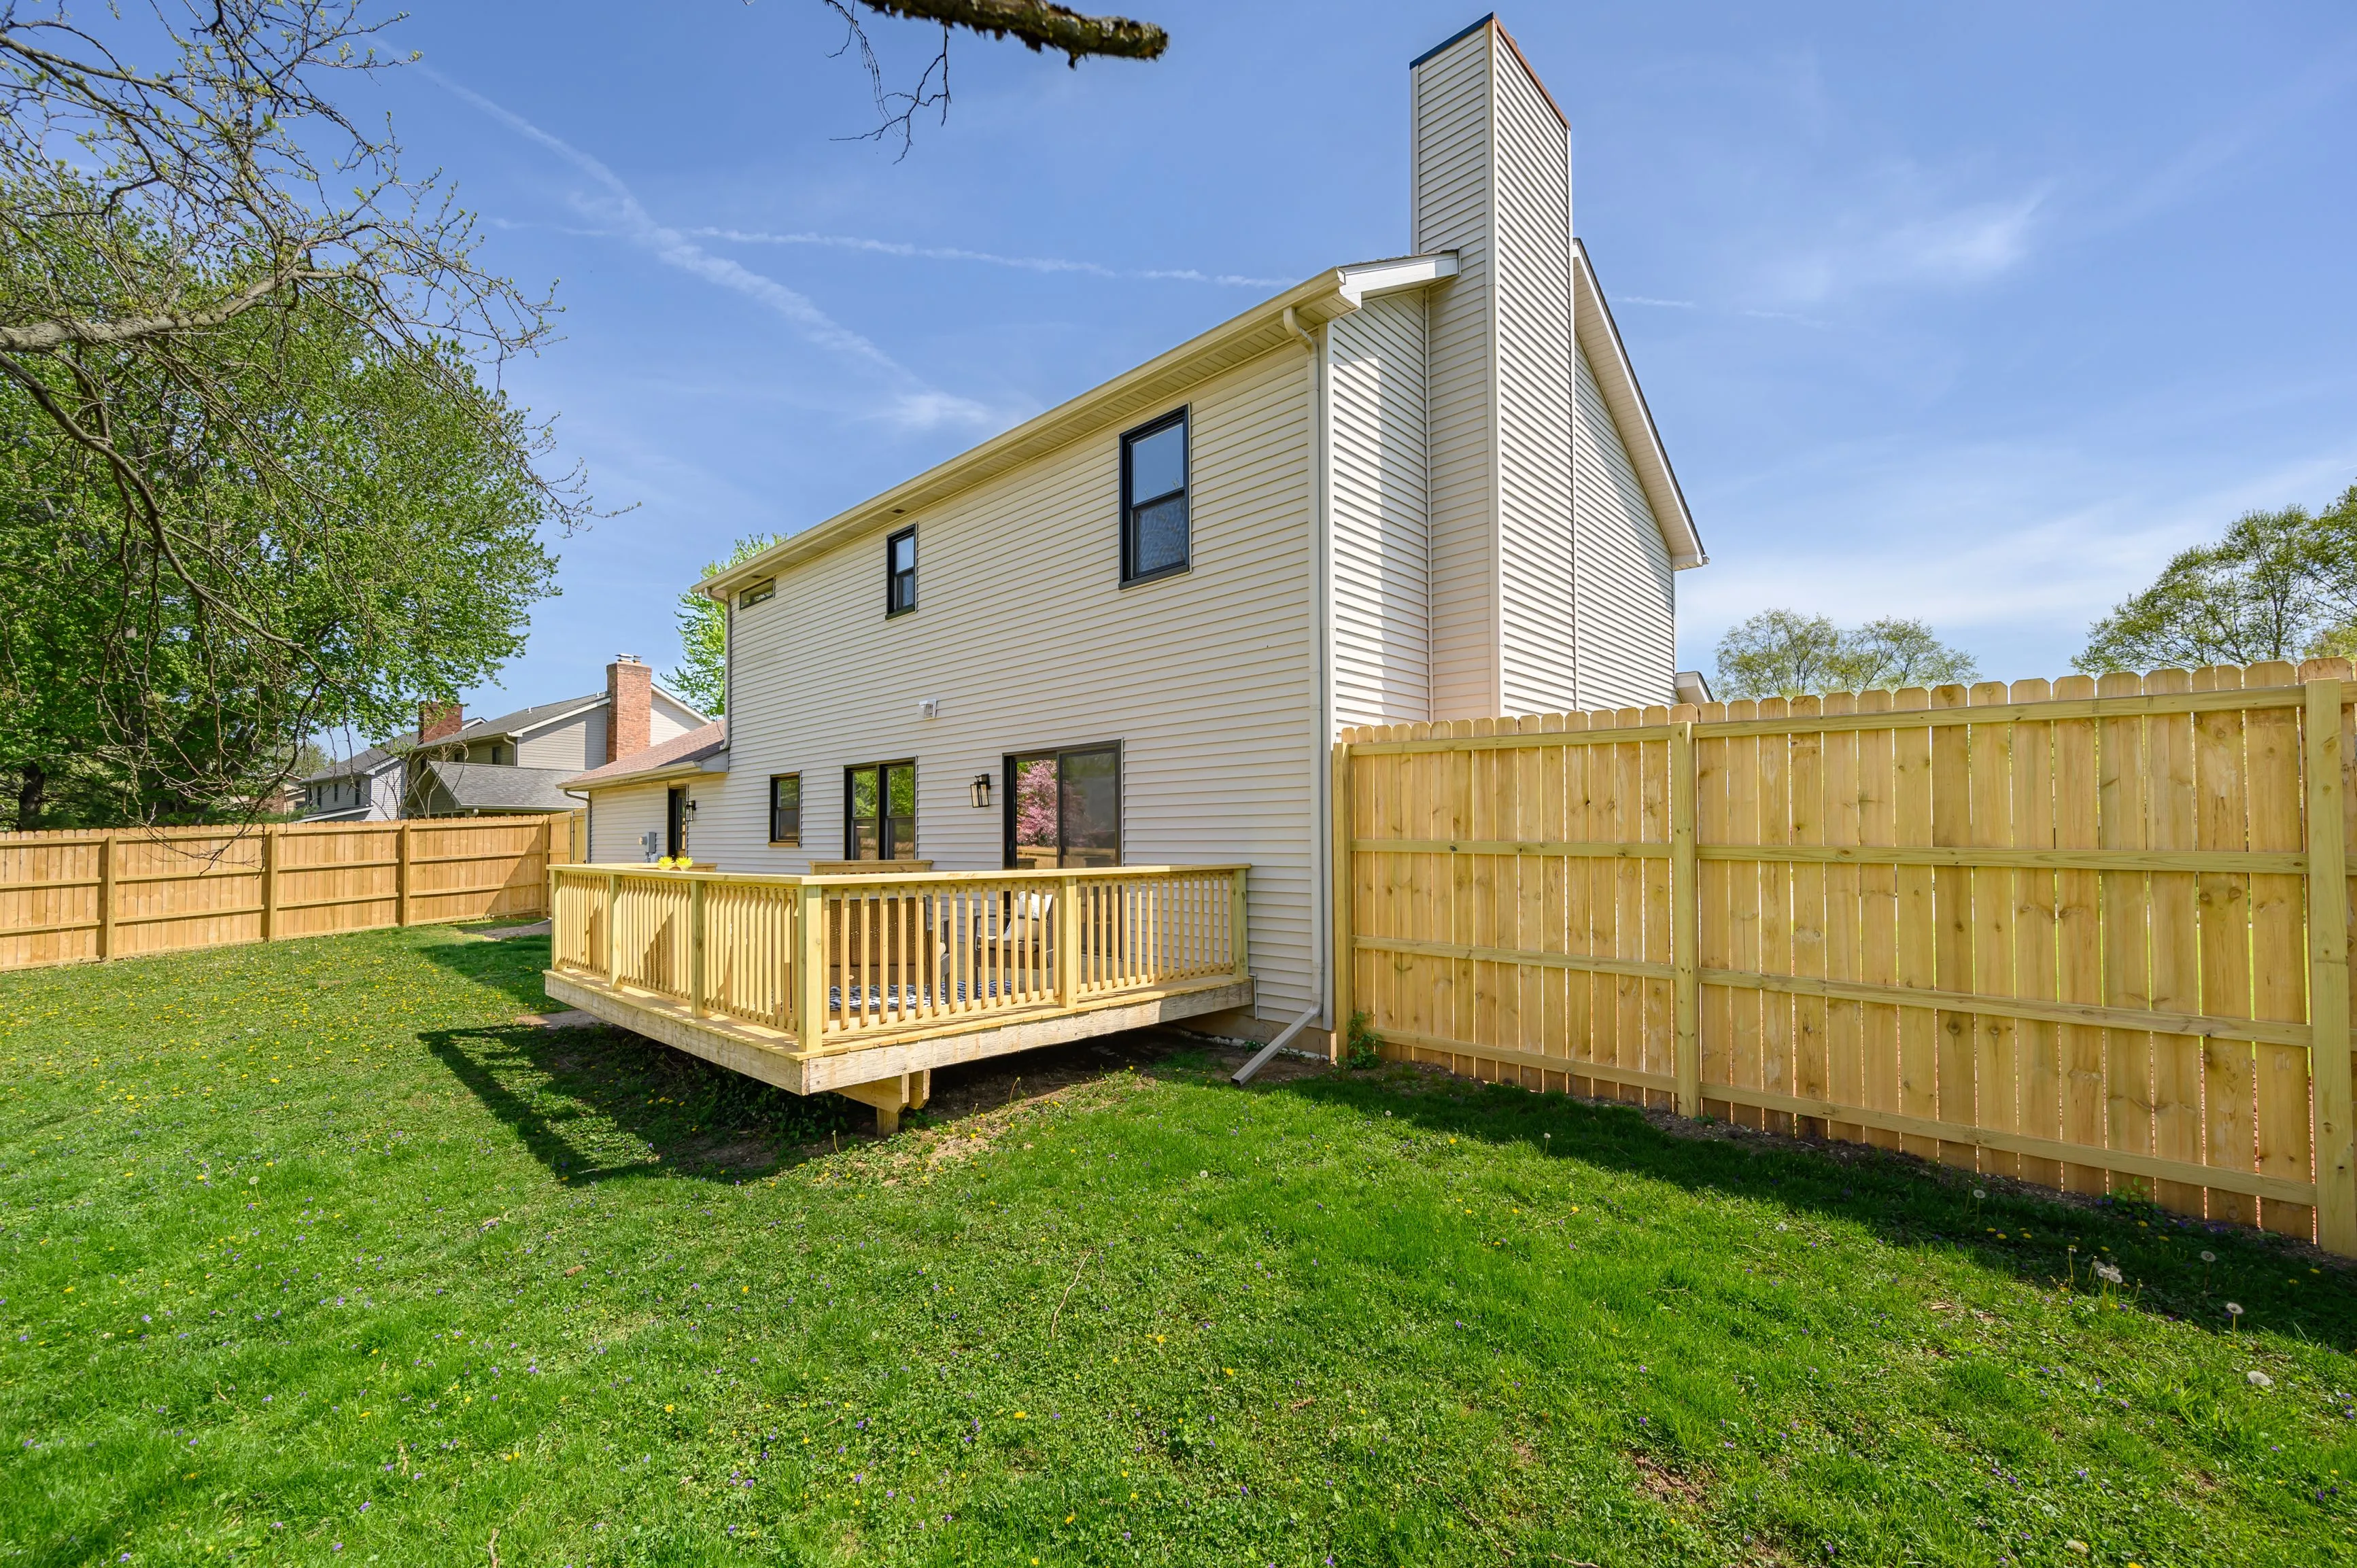 Two-story house with a wooden deck and fenced backyard on a sunny day.